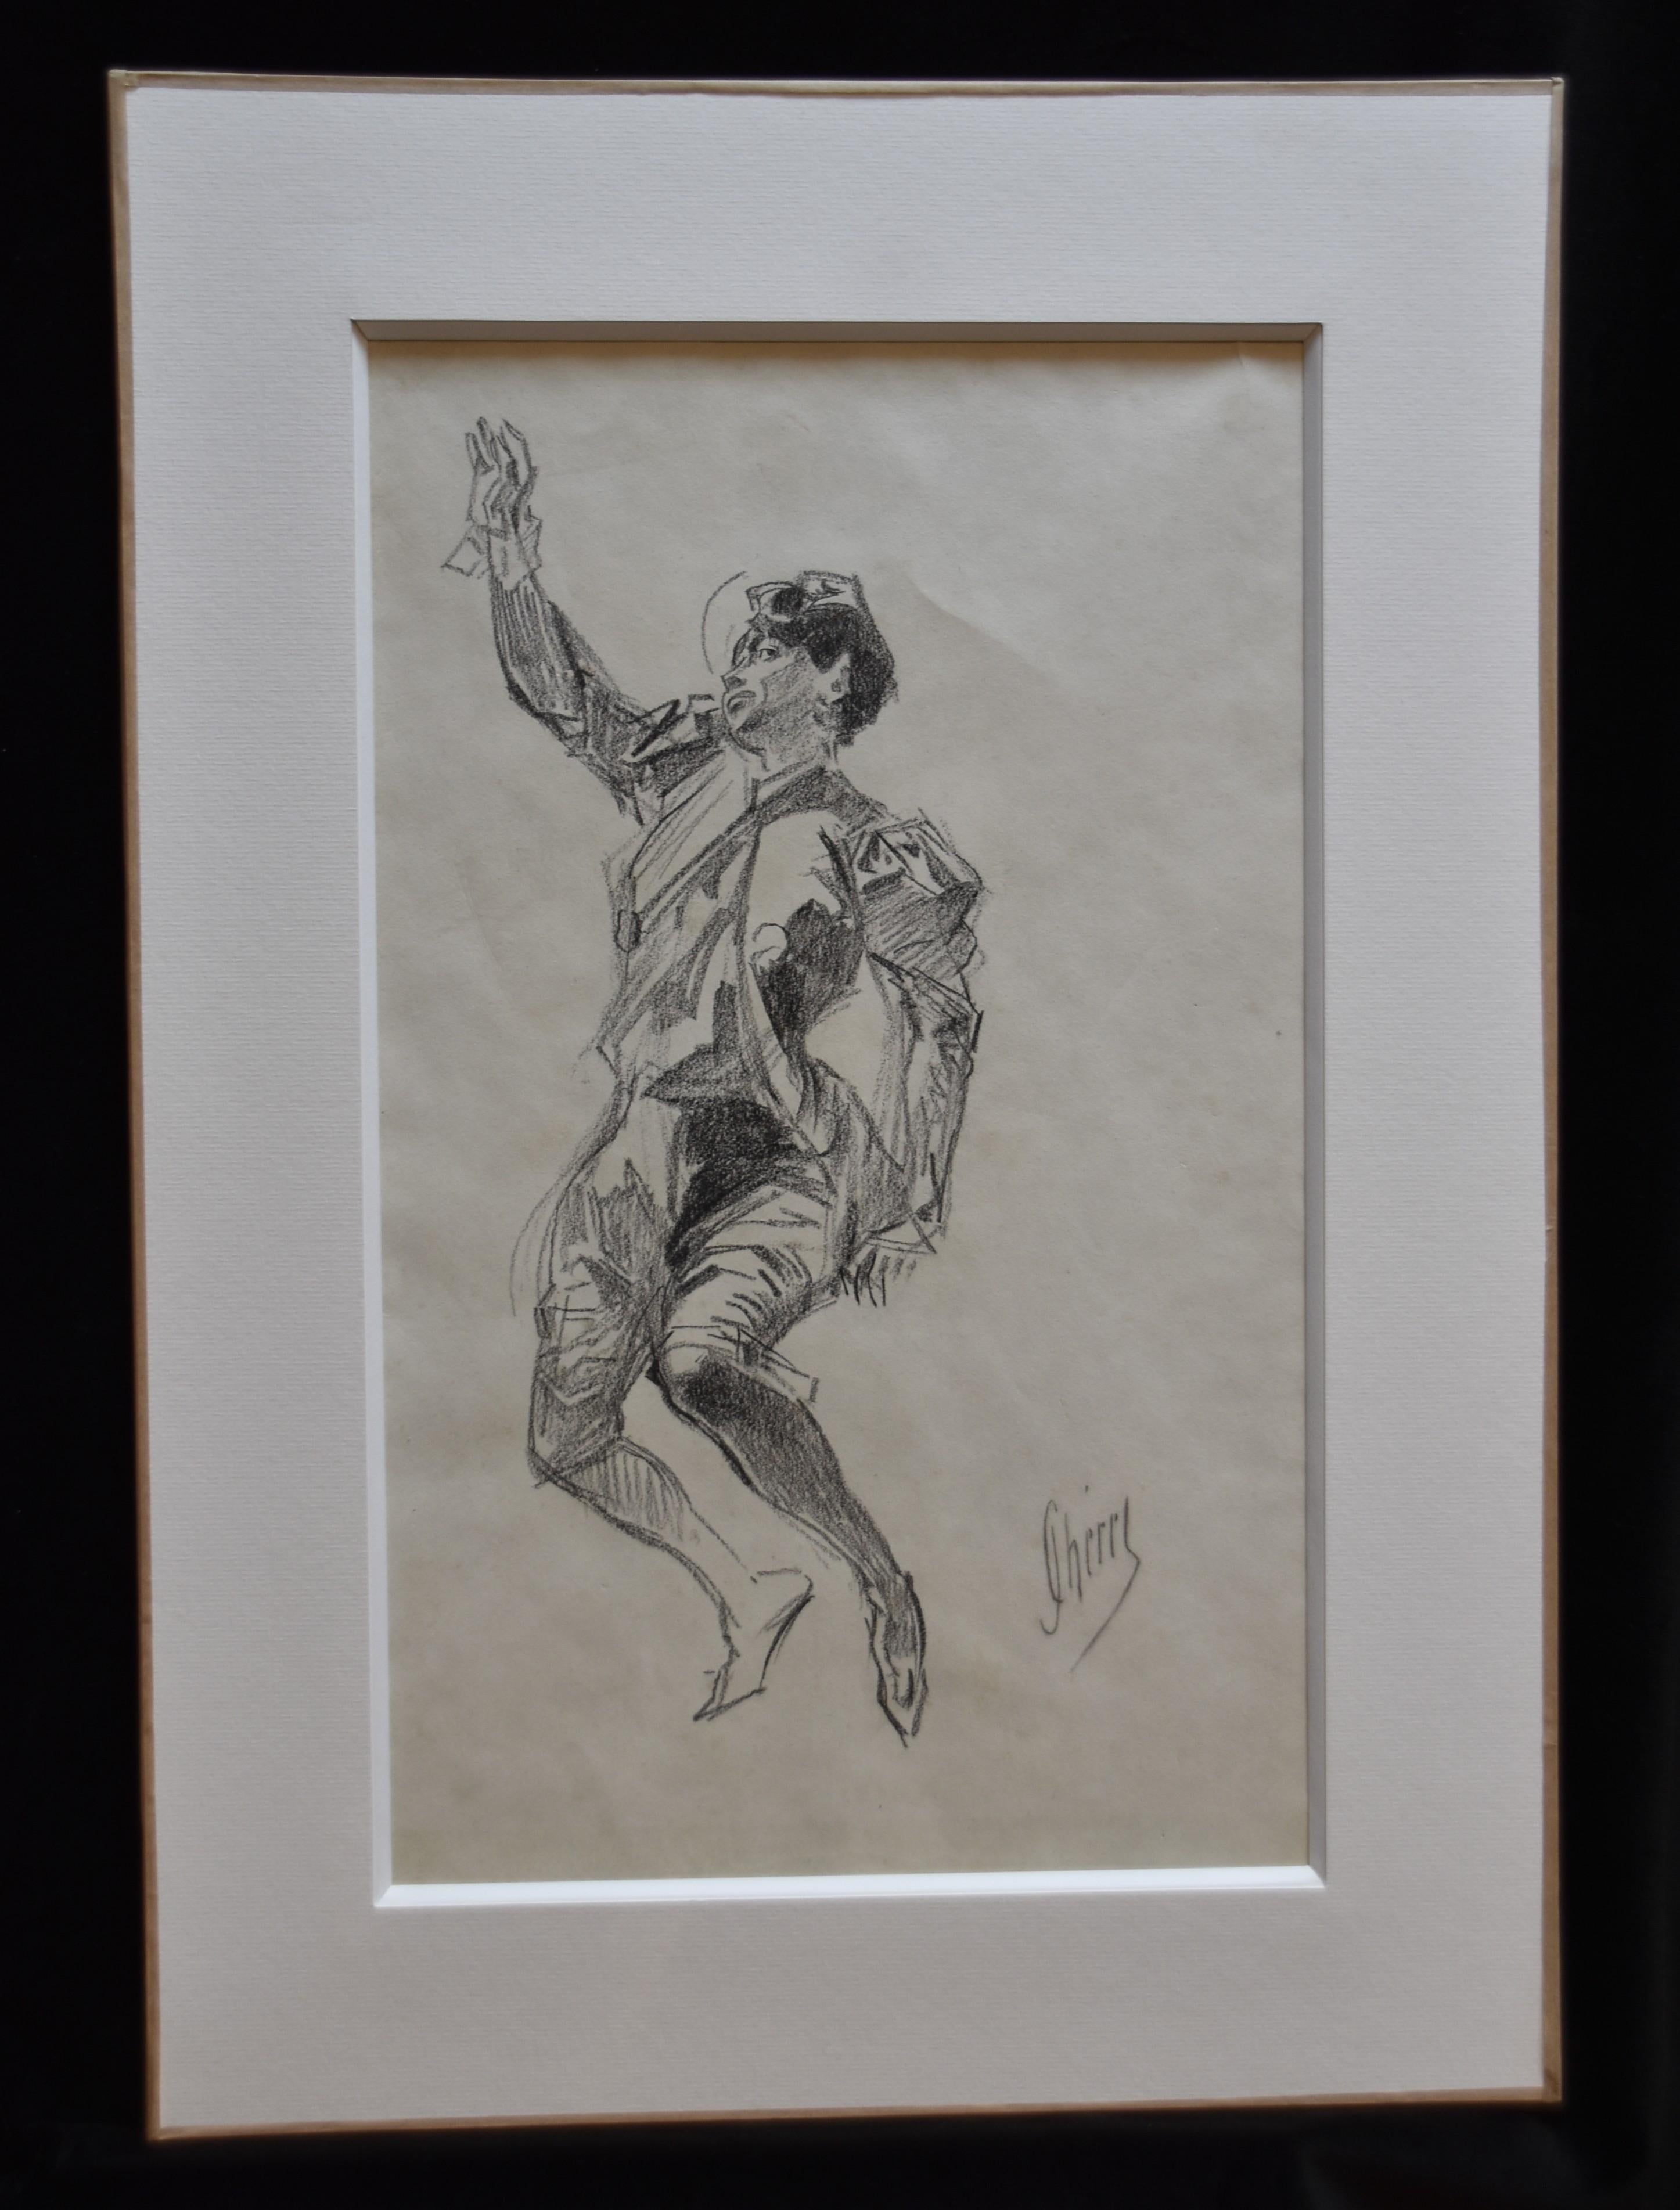 Jules Cheret (1836-1932) A bullfighter, charcoal drawing, signed - Art by Jules Chéret